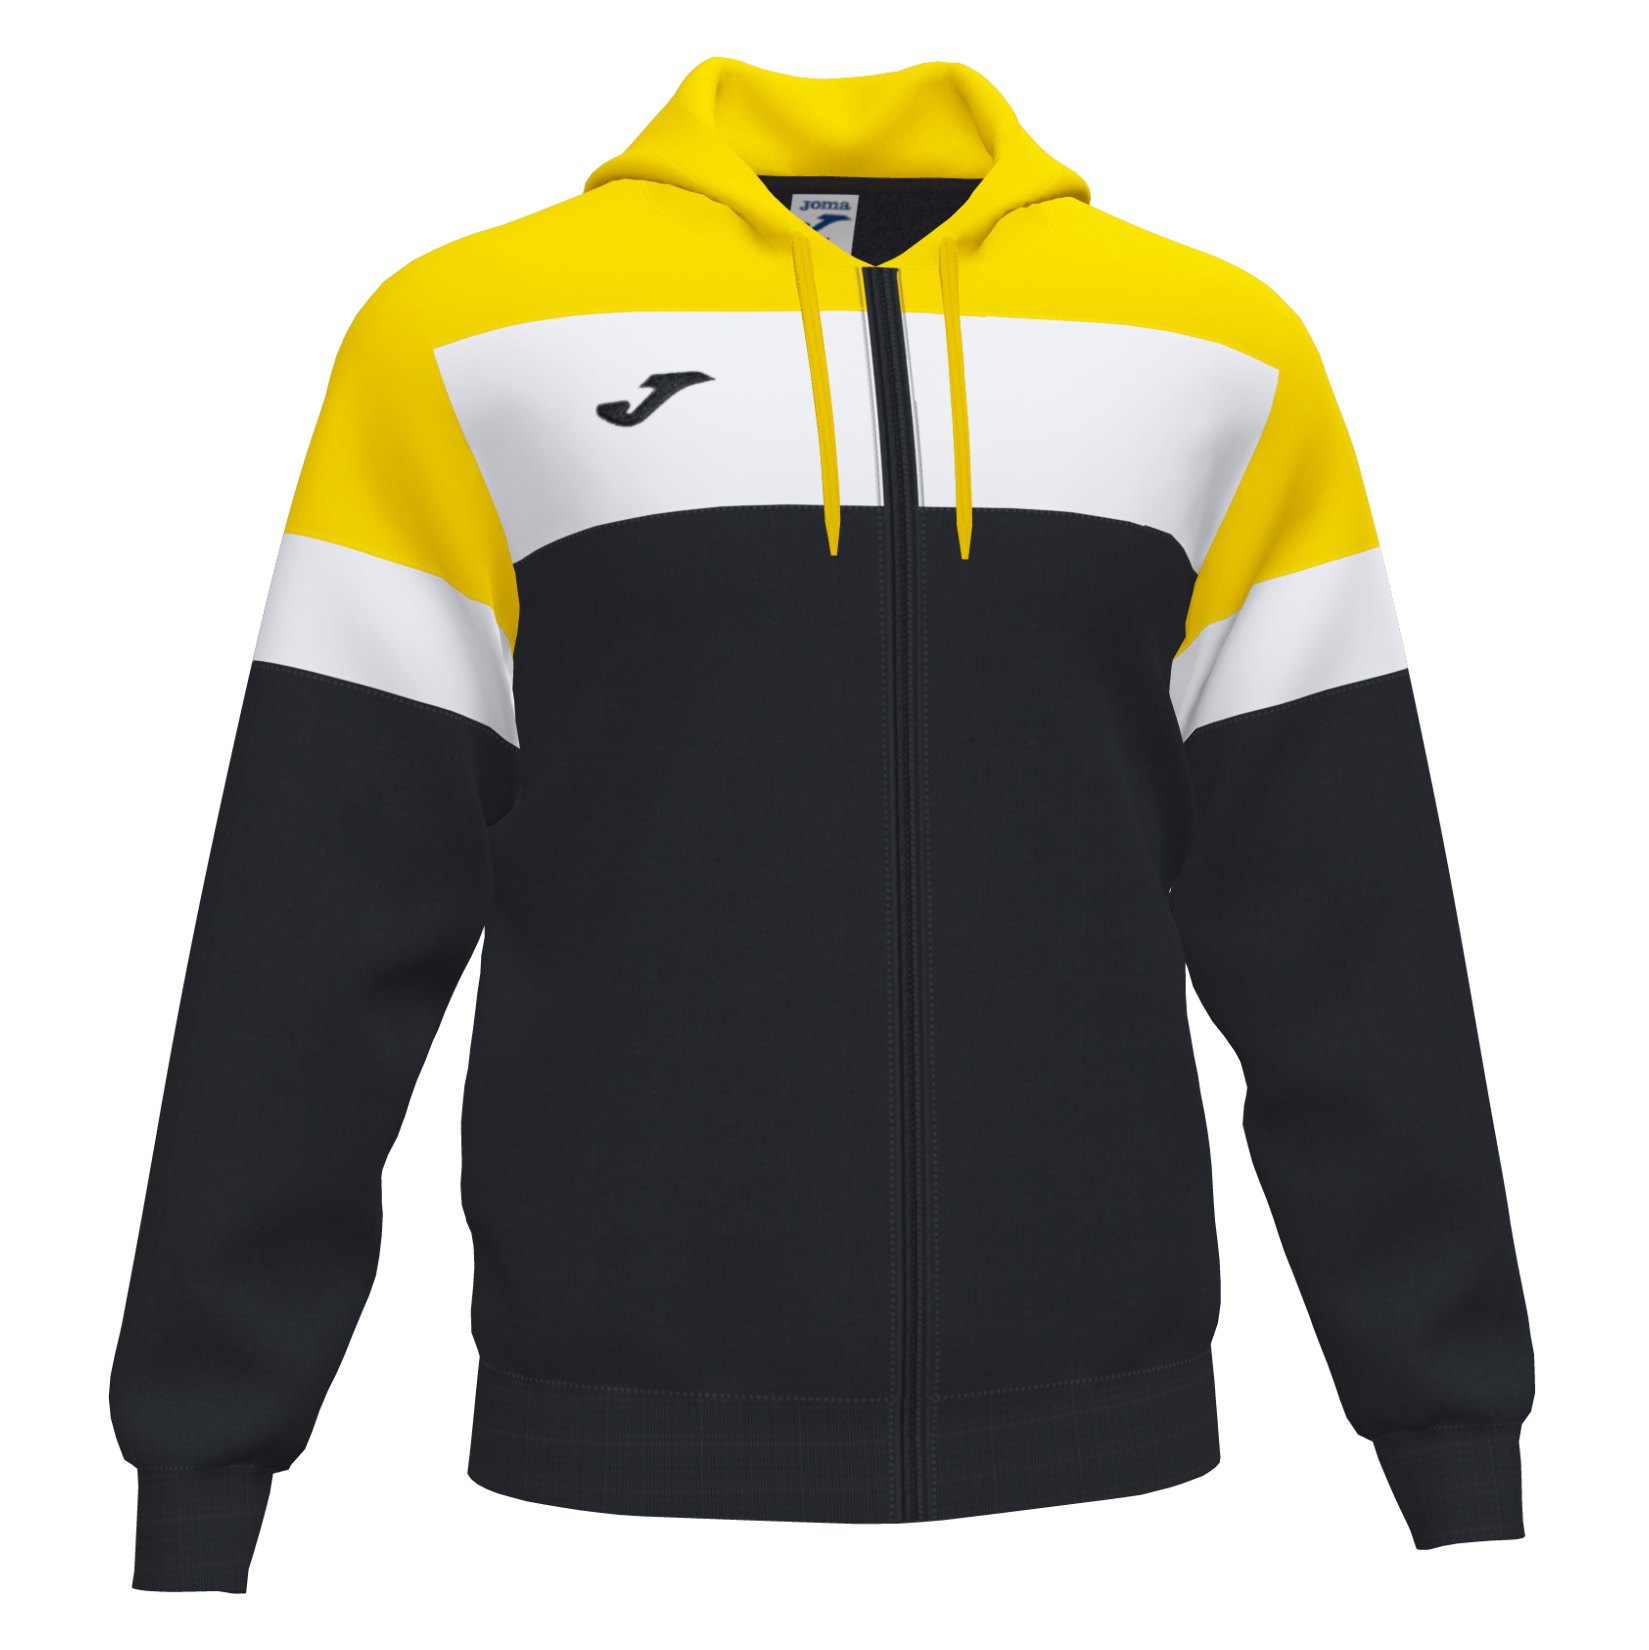 Joma Crew IV Hooded Track Top